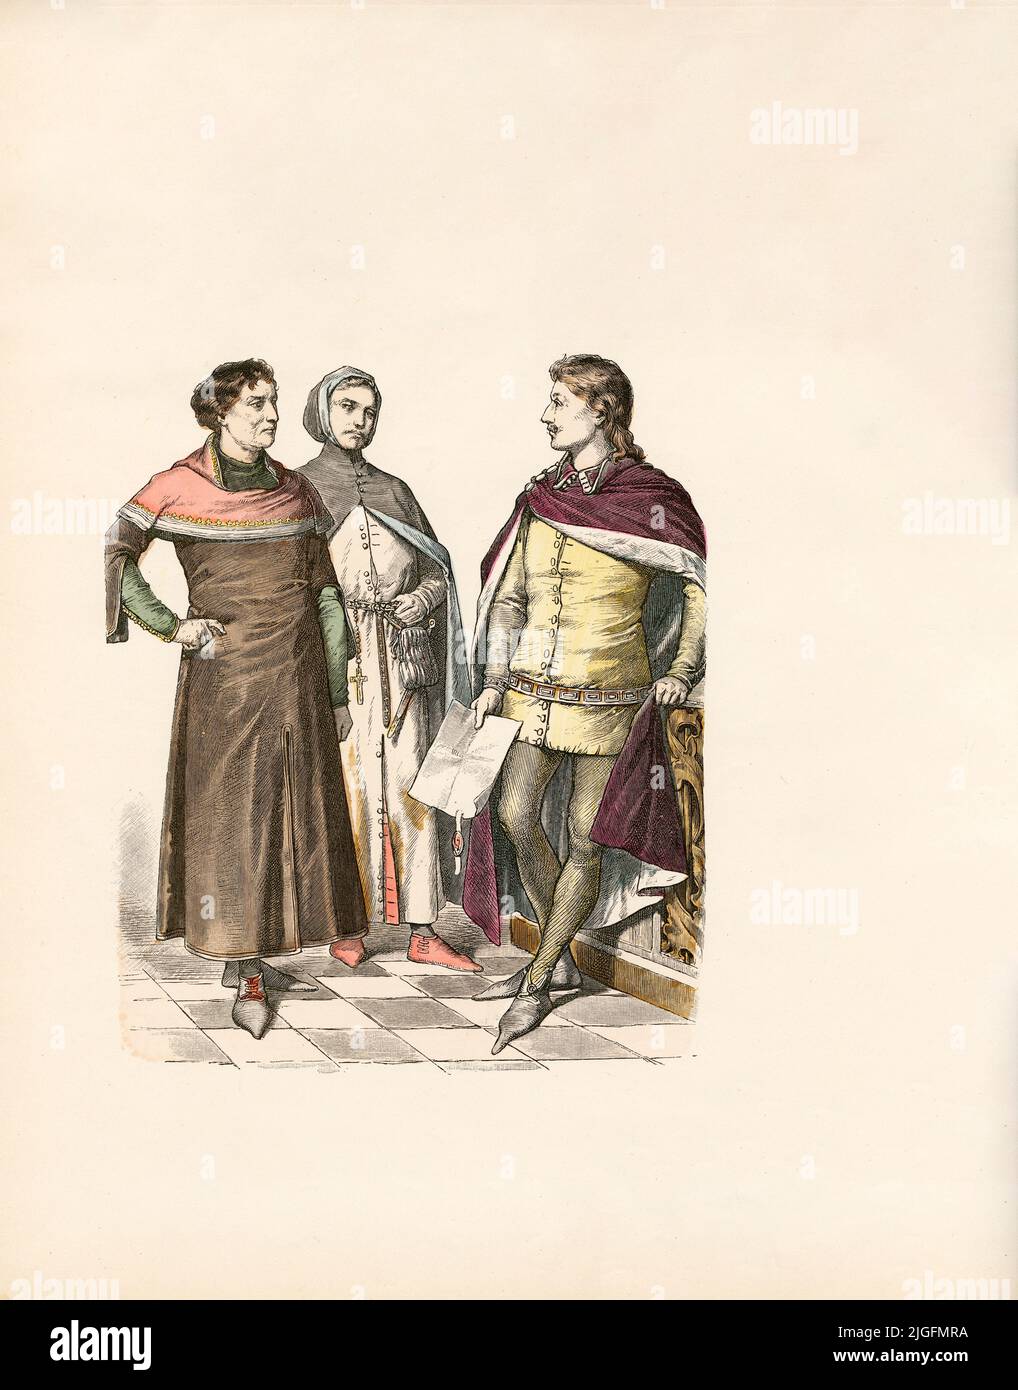 Marchand (1350), noble (1350-1360), Angleterre, 14th siècle, Illustration, The History of Costume, Braun & Schneider, Munich, Allemagne, 1861-1880 Banque D'Images